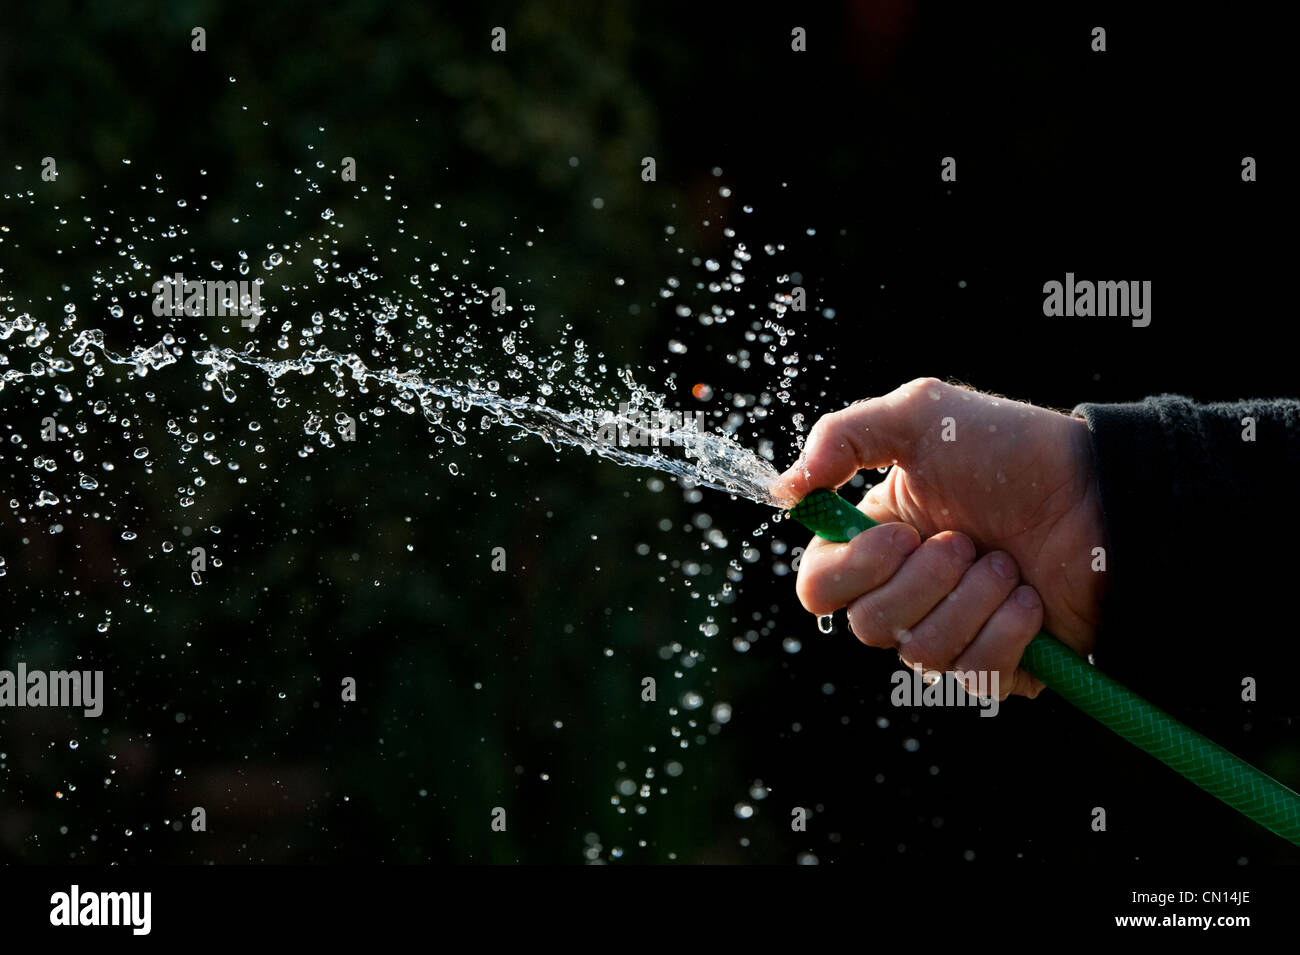 Hand spraying water with hosepipe against a dark background Stock Photo